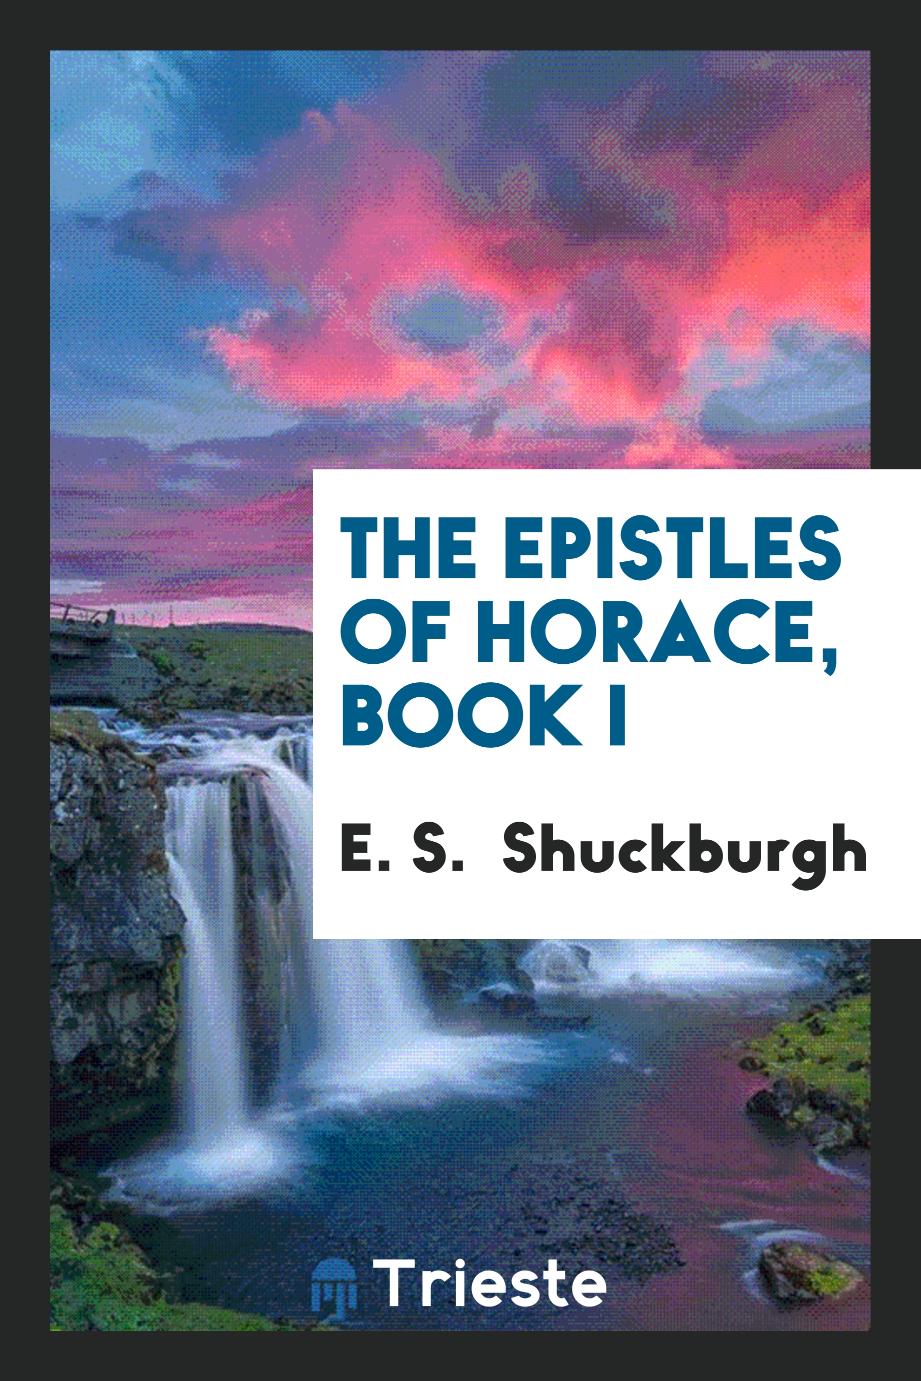 The Epistles of Horace, Book I